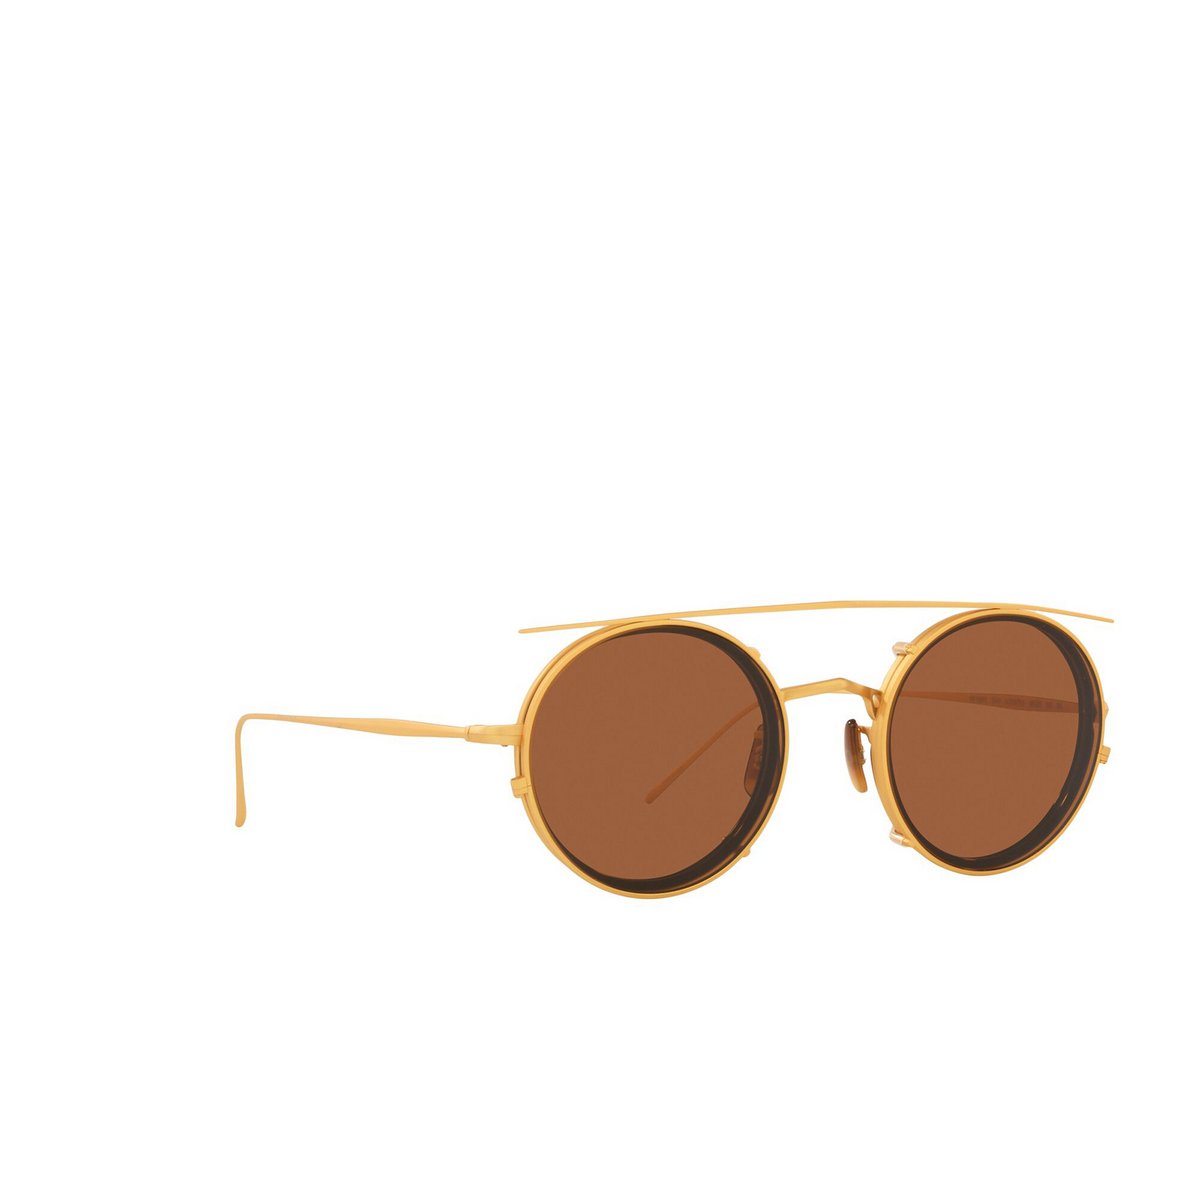 Oliver Peoples G. PONTI-2 Sunglasses 5414 Brushed Brass - three-quarters view